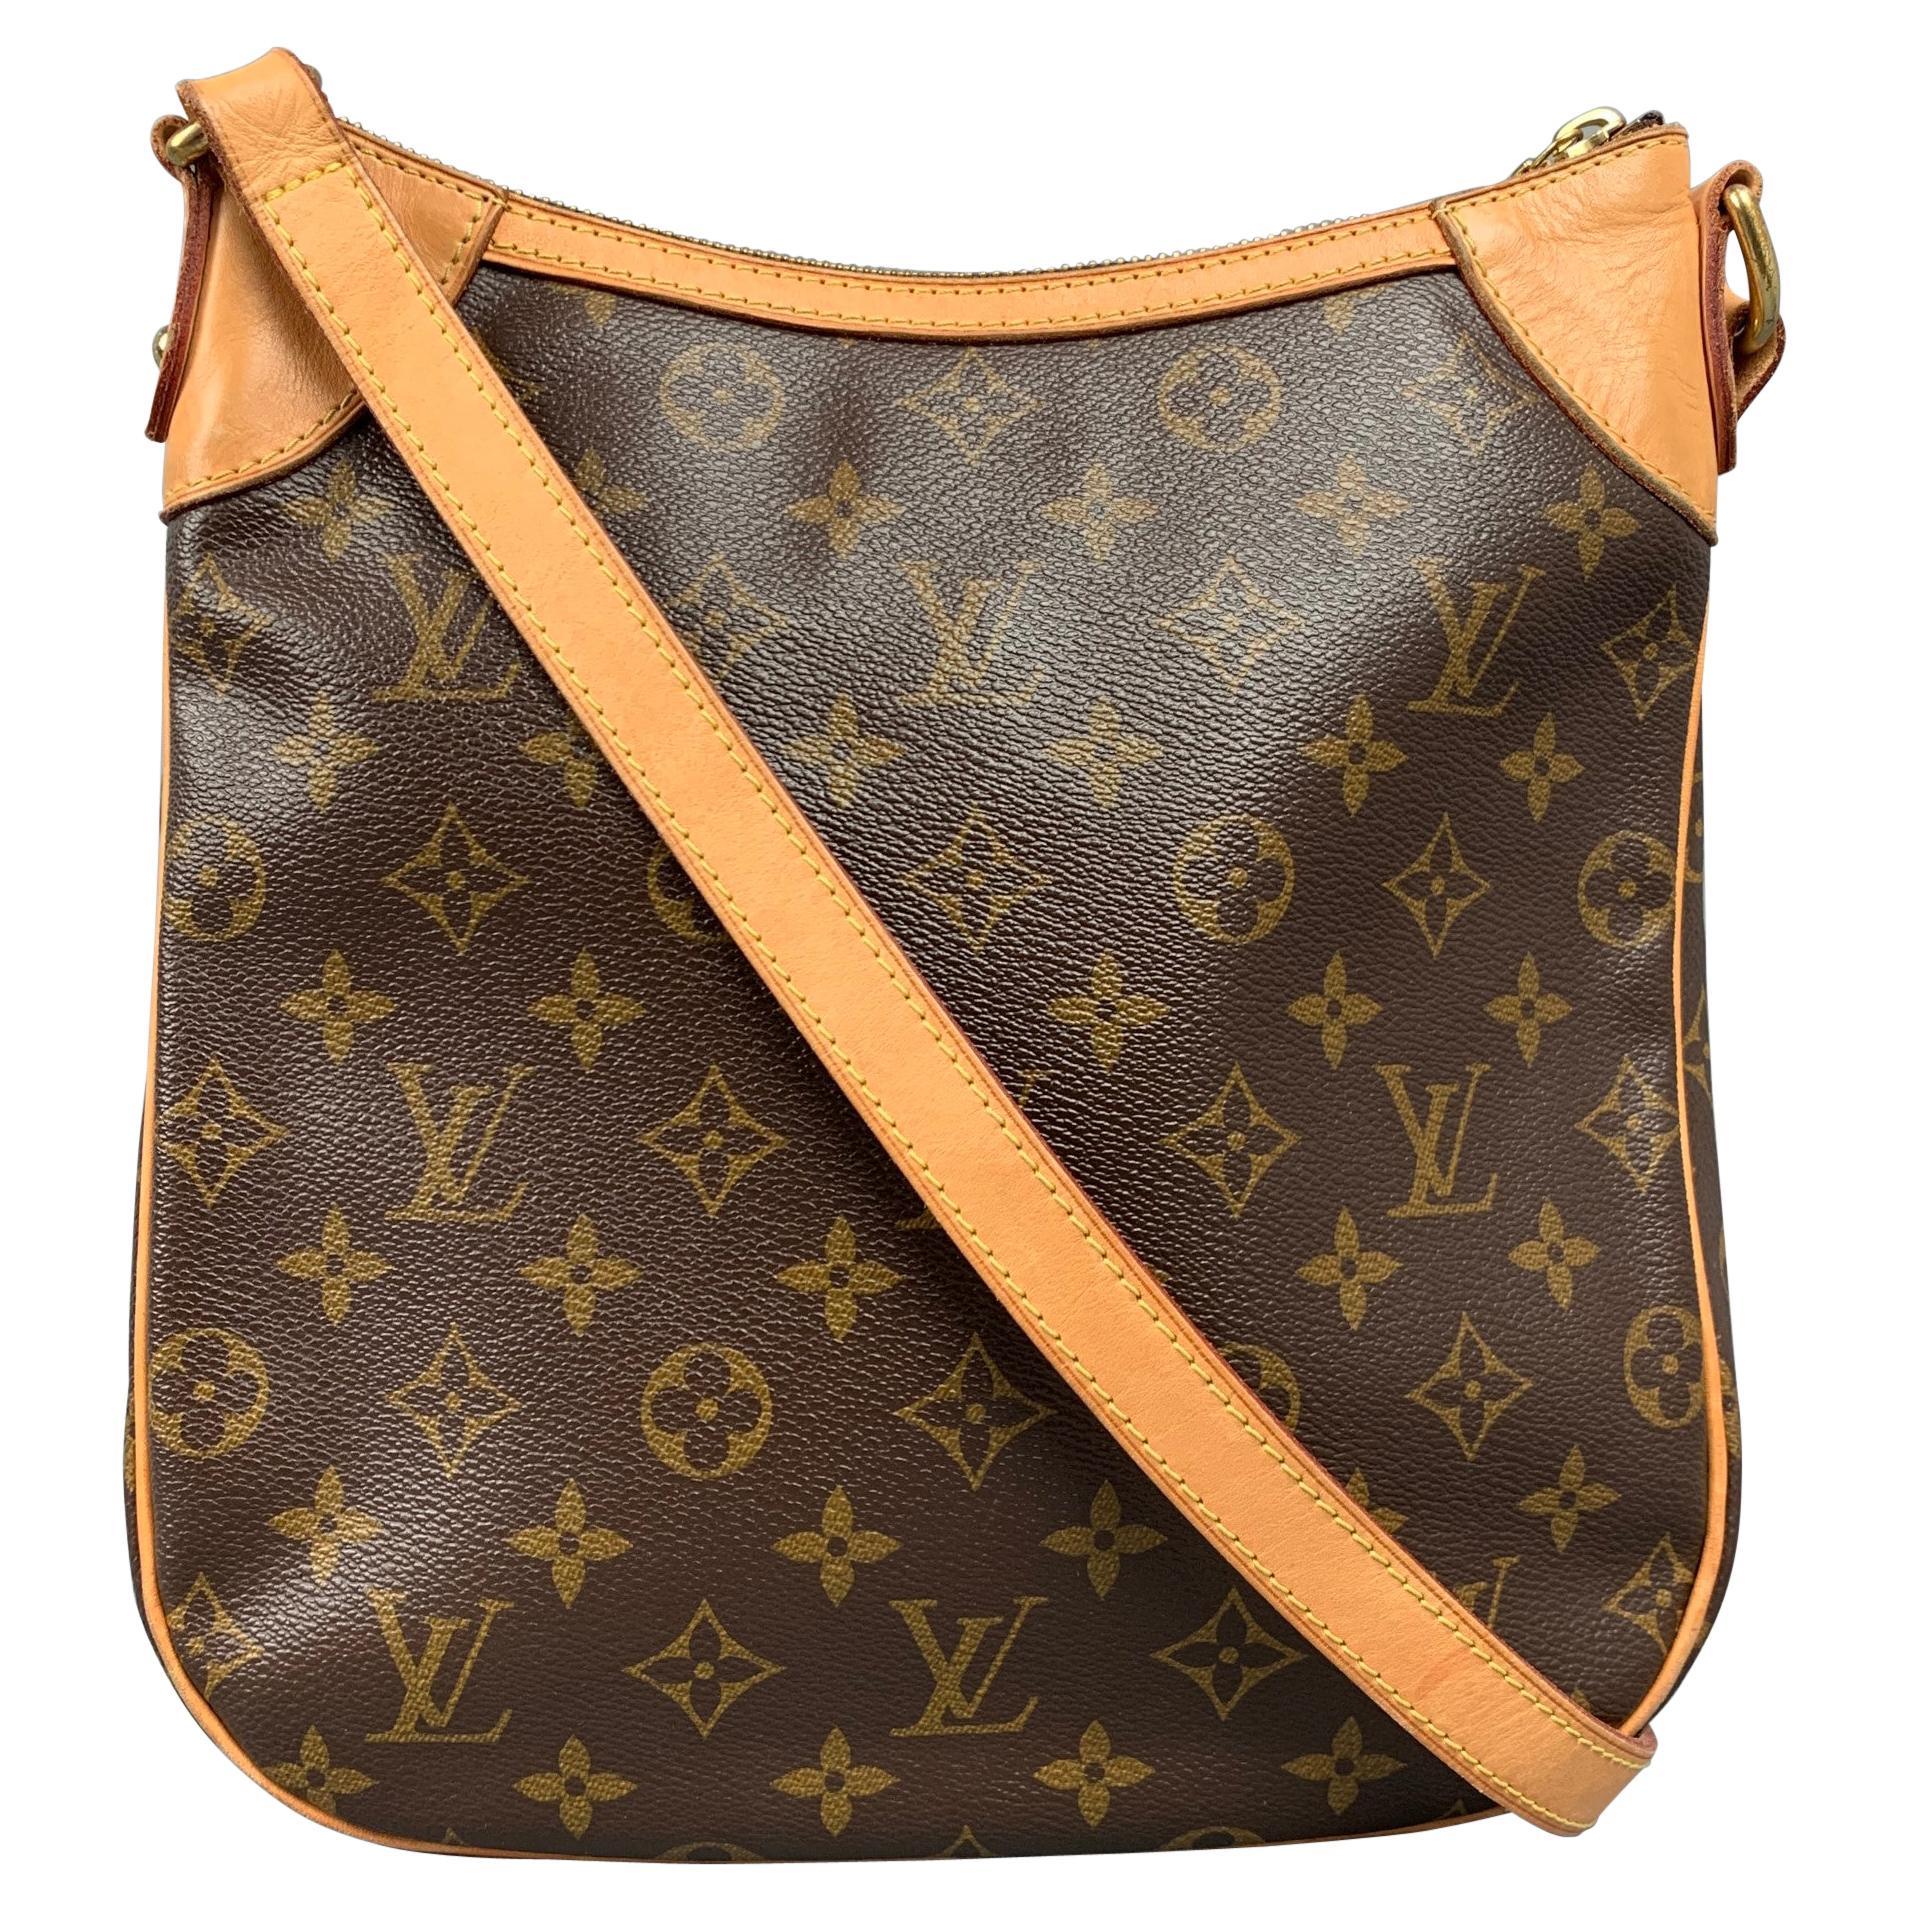 WIMB/Review of LV Odeon MM 